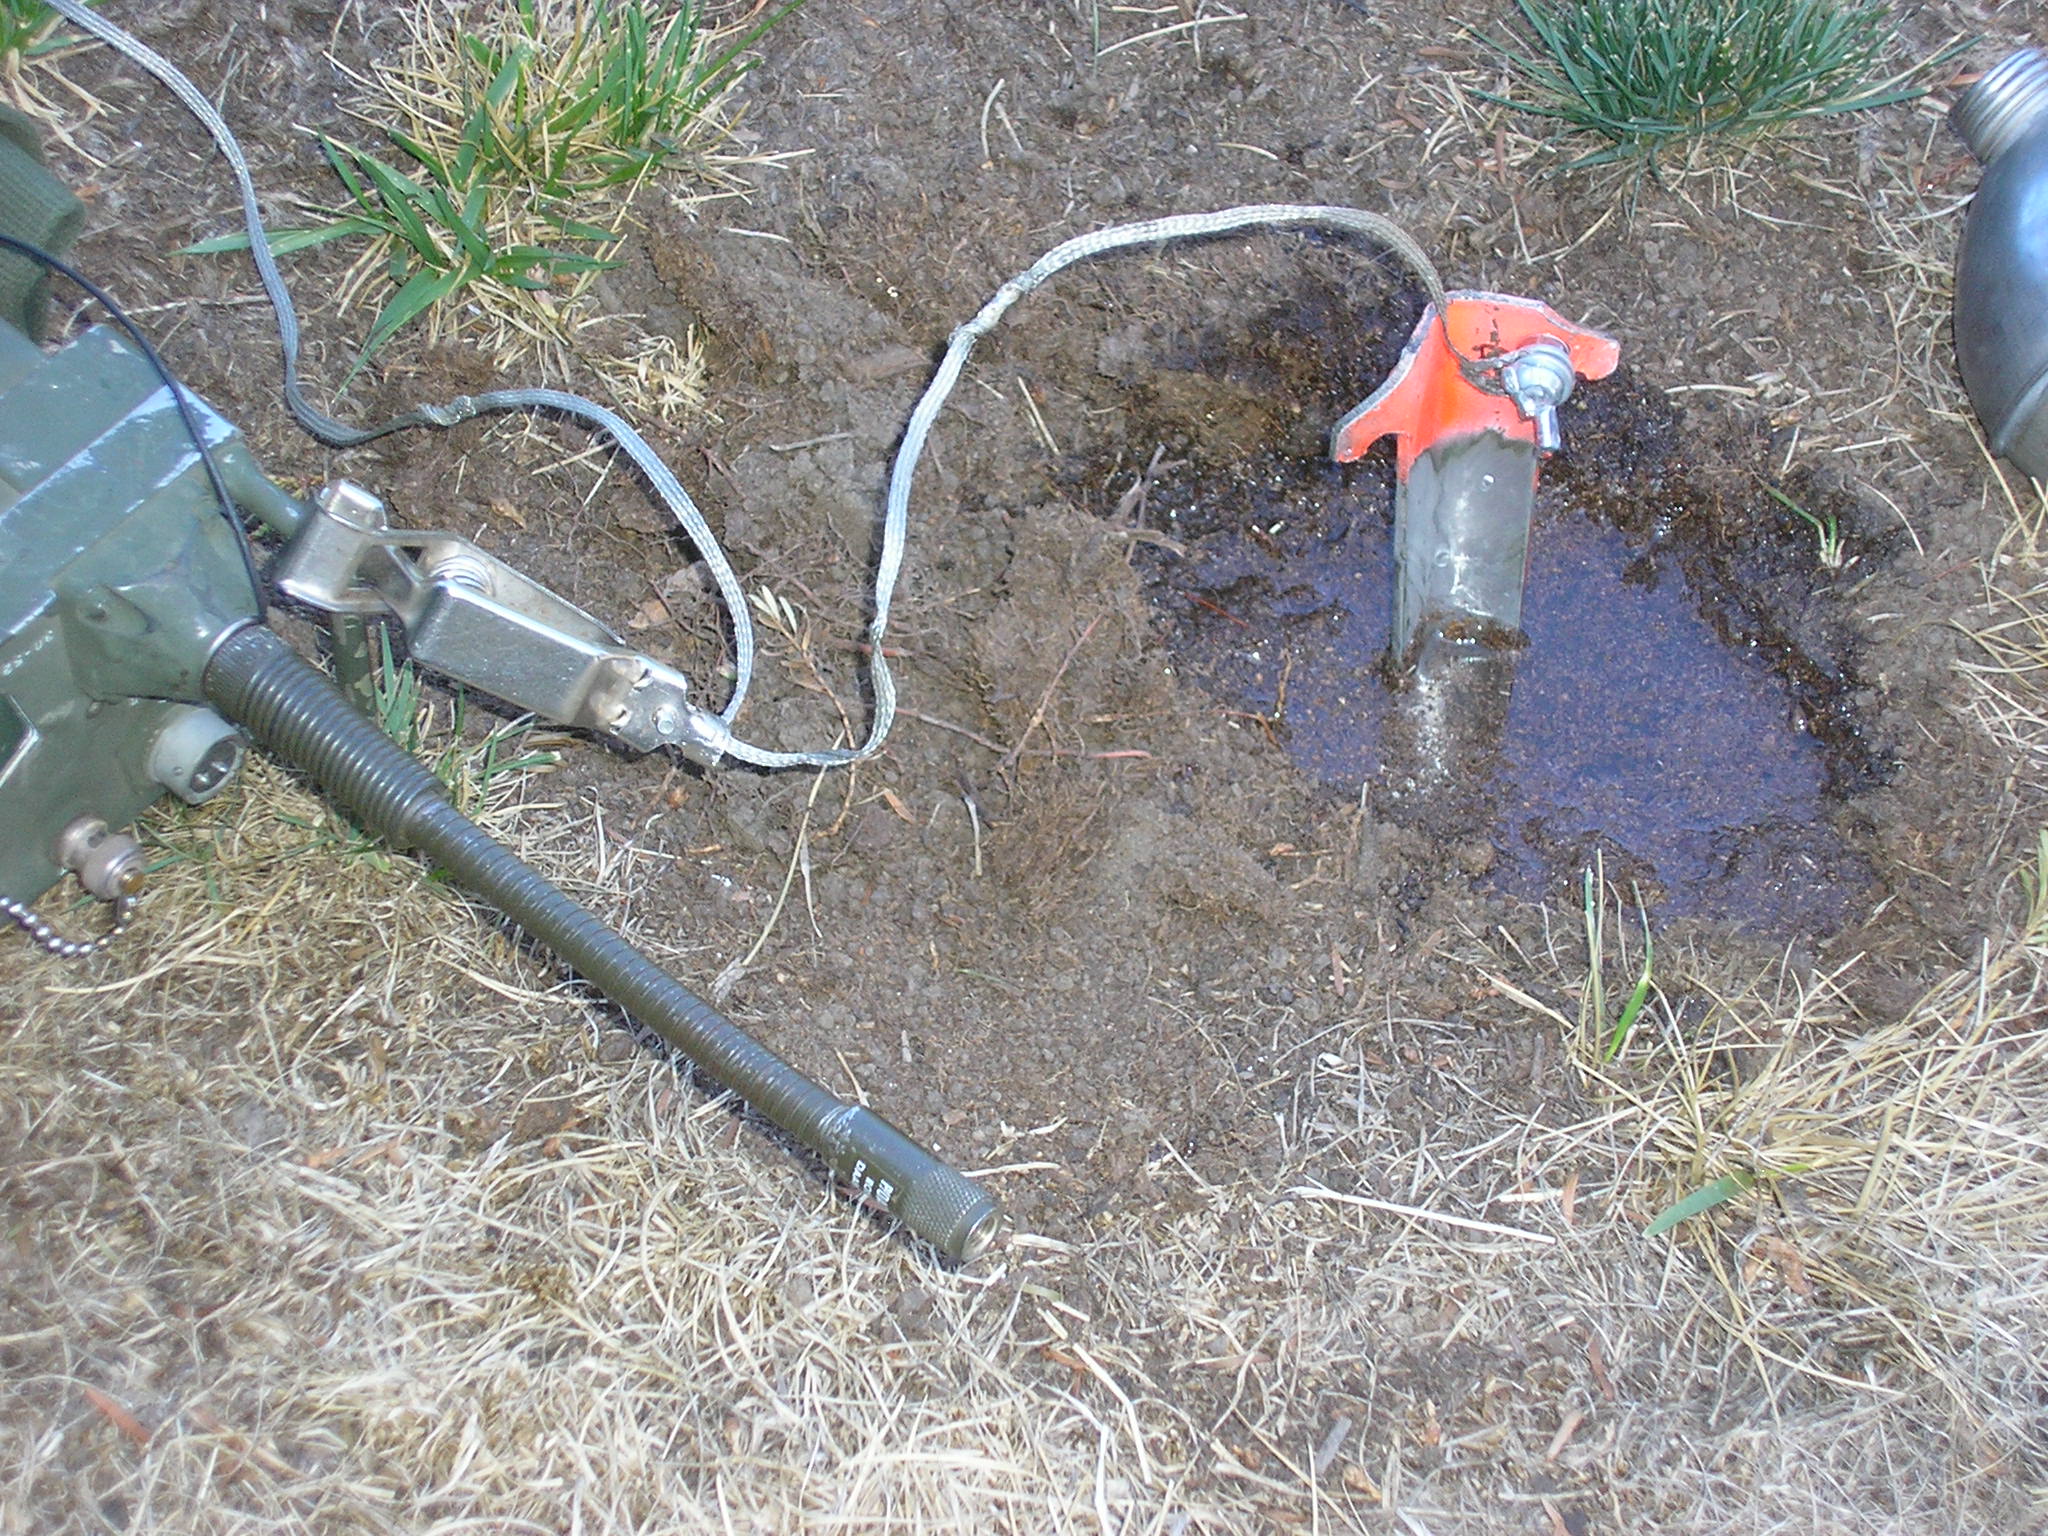 Field improvised ground connection